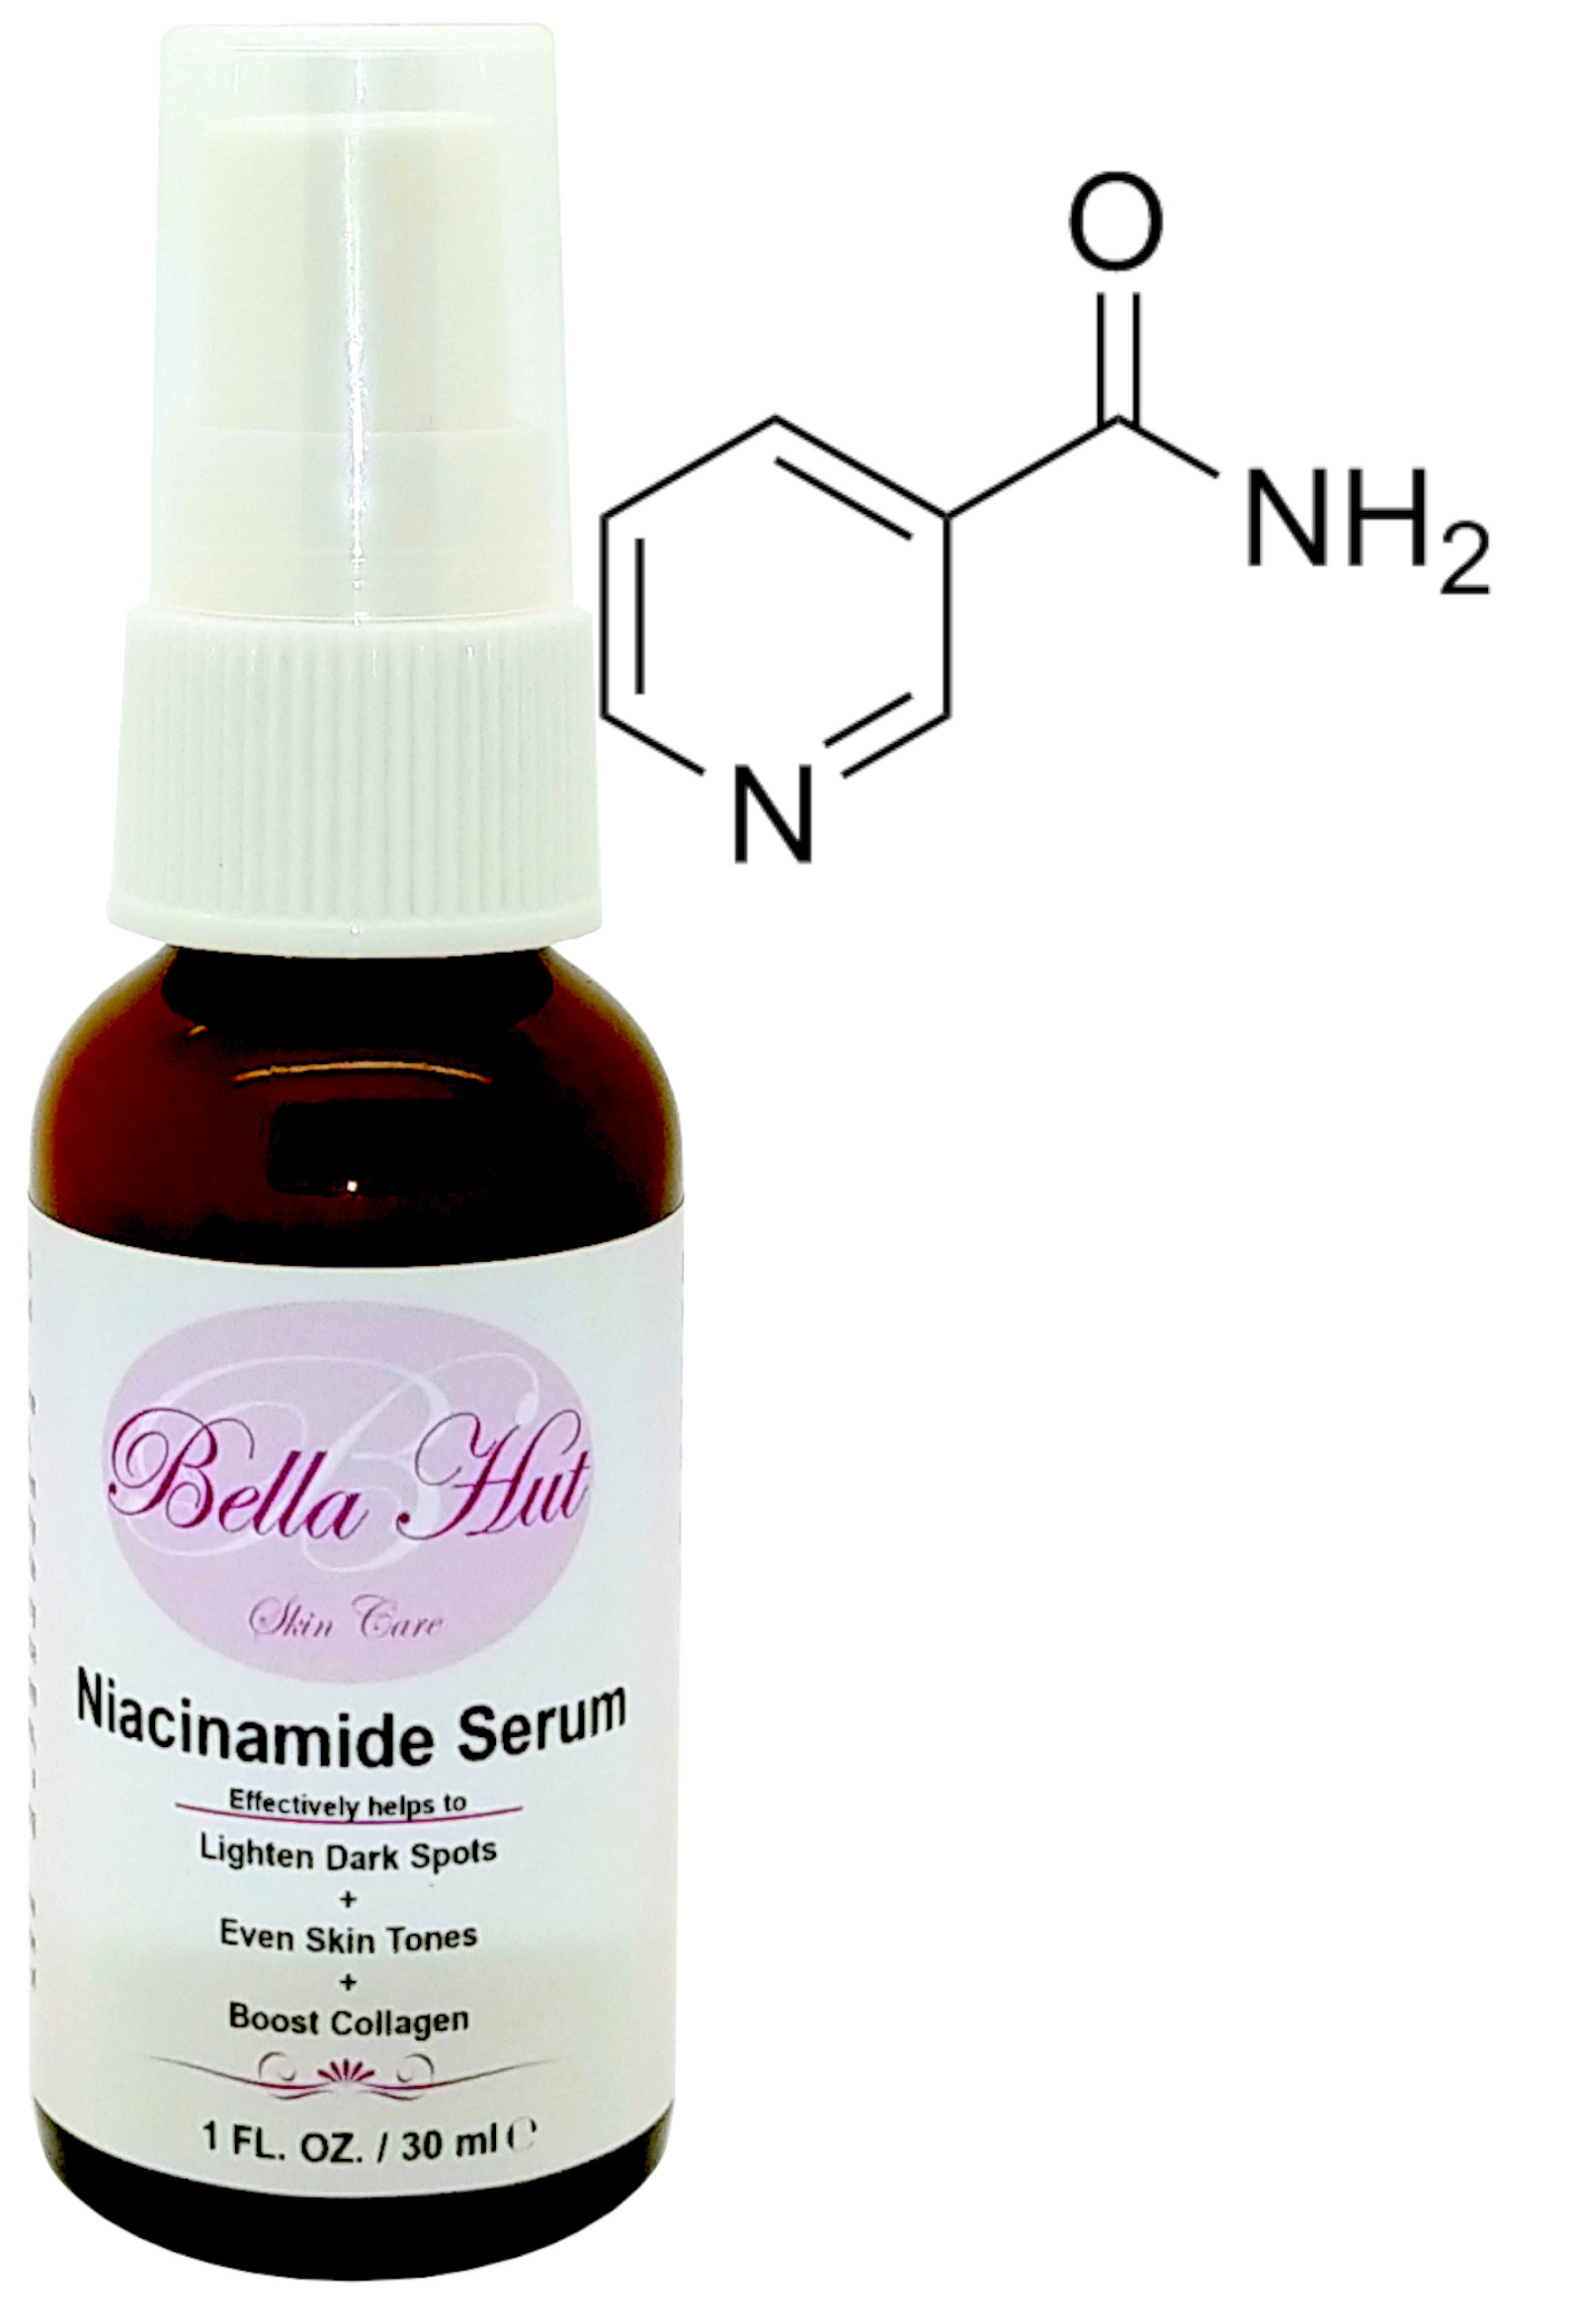 B3 NIACINAMIDE SERUM with B3 Niacinamide, Tripeptide-5 And Collagen Booster for treating hyperpigmentation